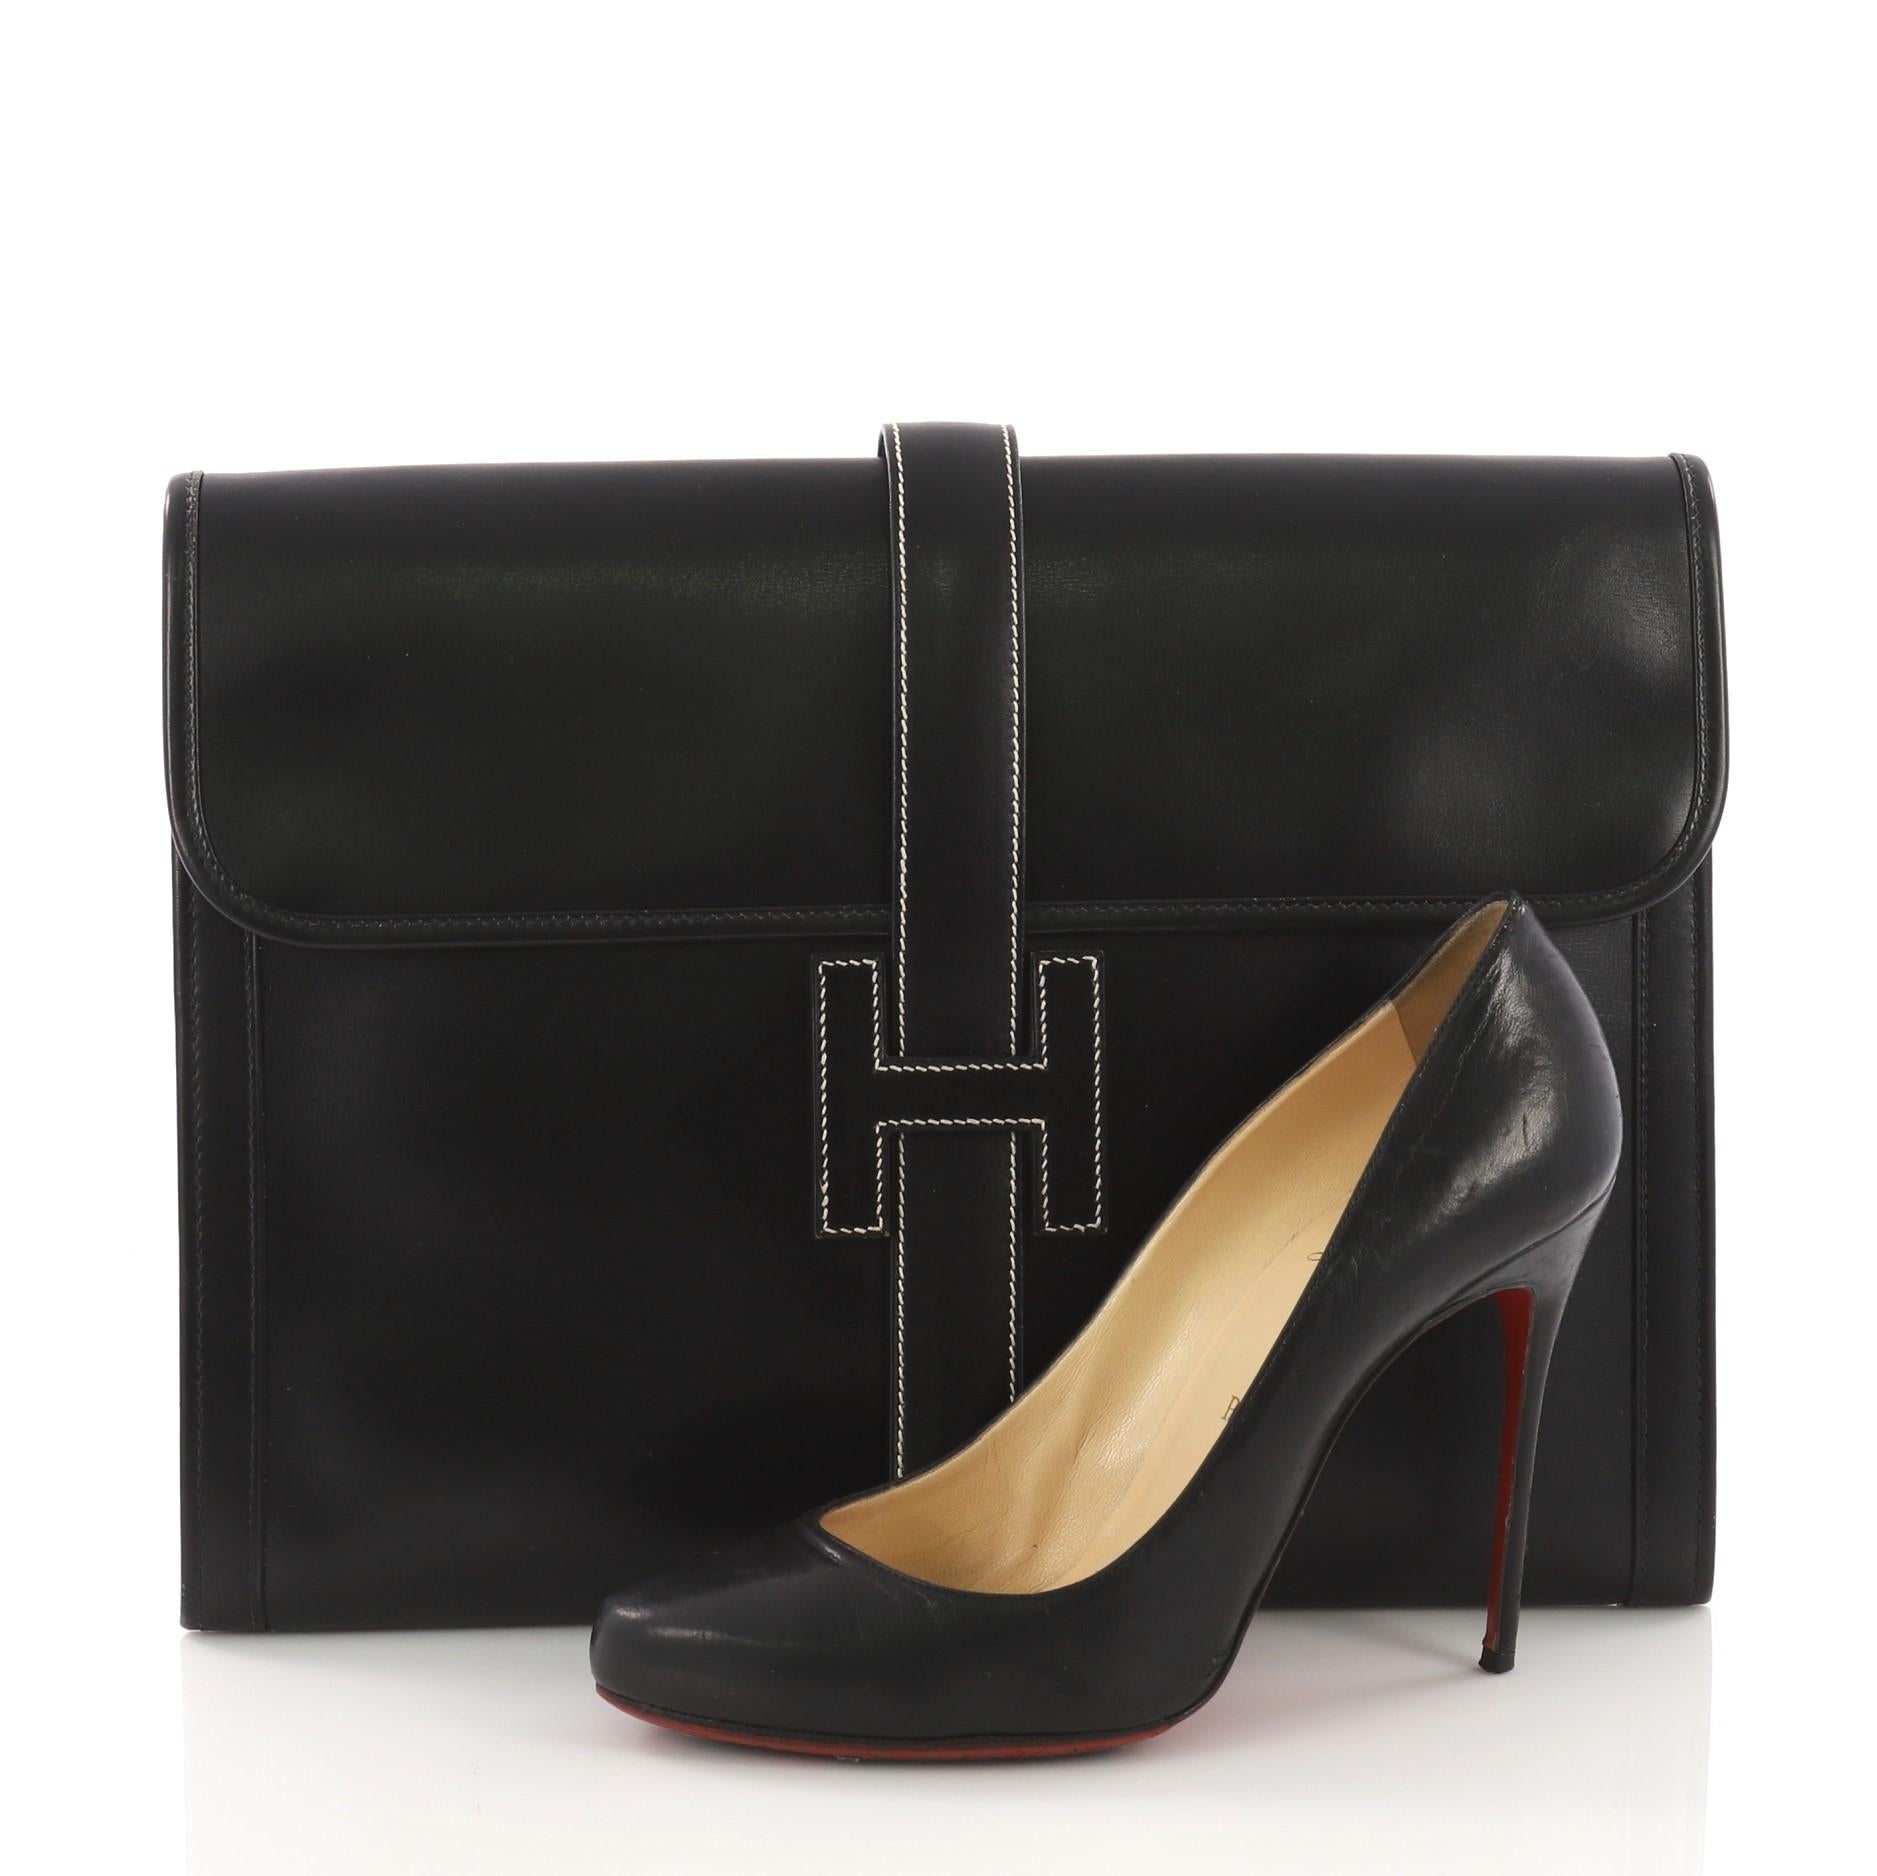 This Hermes Jige Clutch Box Calf GM, crafted in black calf leather, features a cross-over flap and strap that tucks under the logo H. It opens to a beige fabric interior. **Note: Shoe photographed is used as a sizing reference, and does not come